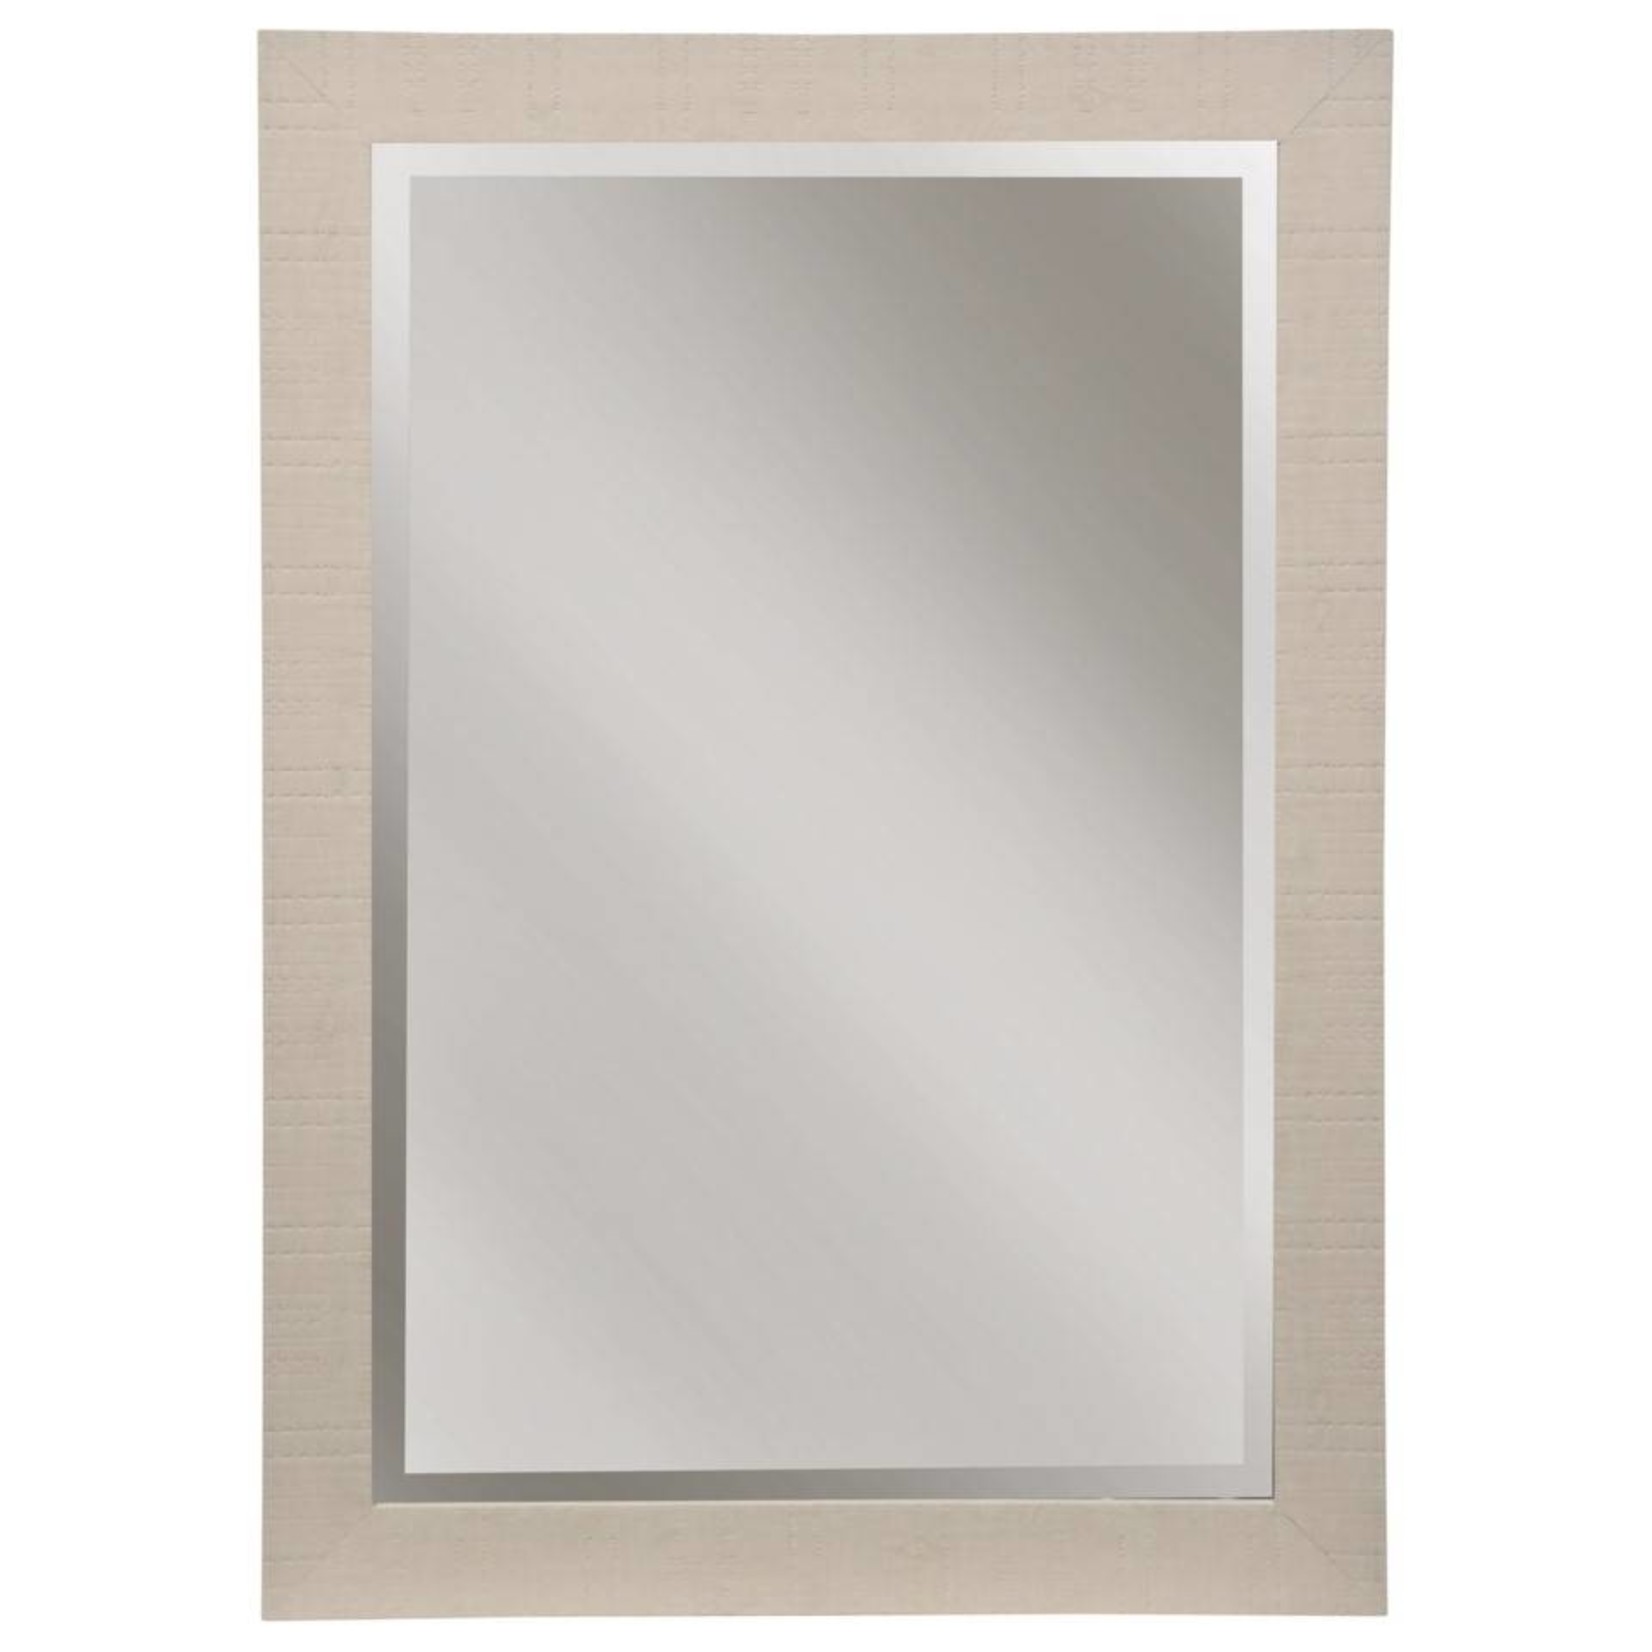 Etched Molding Frame Mirror